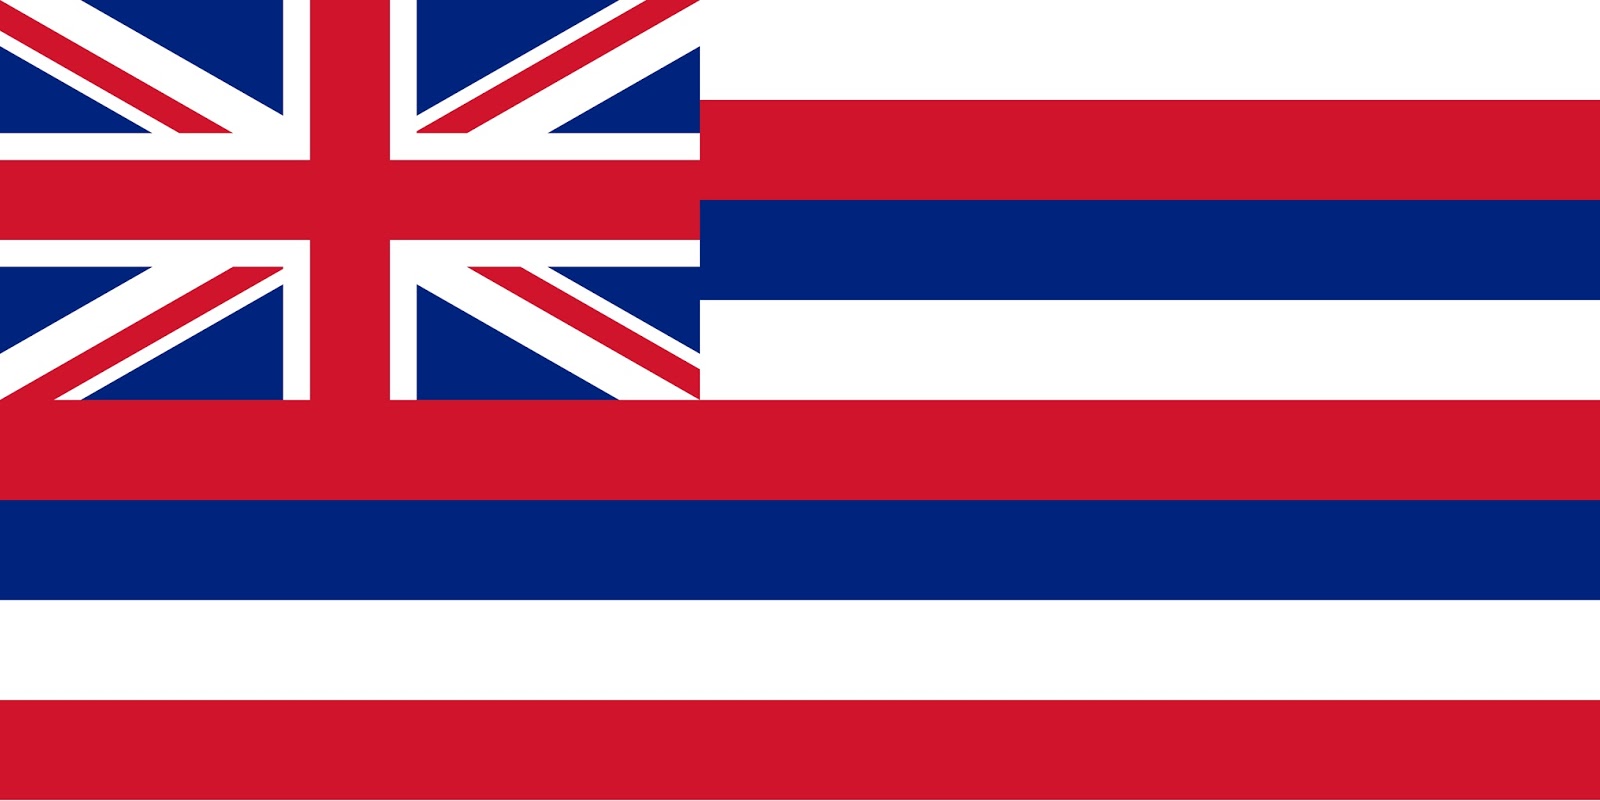 USA, Hawaii Geothermal Energy is Part of Islands' Power Supply